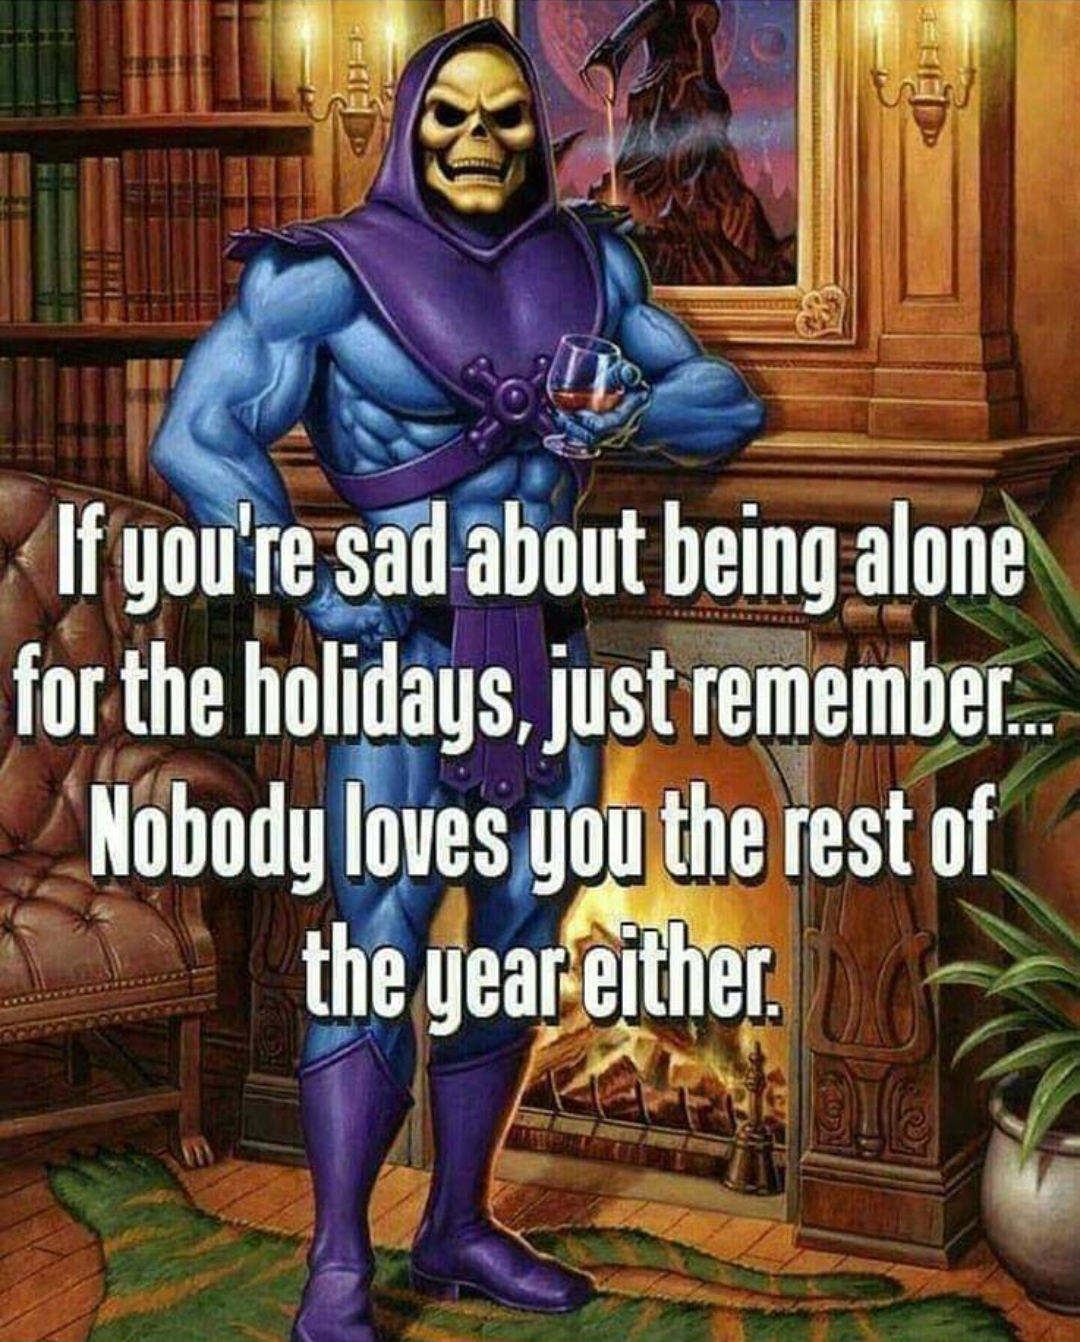 memes - skeletor meme - If you're sad about being alone for the holidays, just remember... Nobody loves you the rest of the year either.